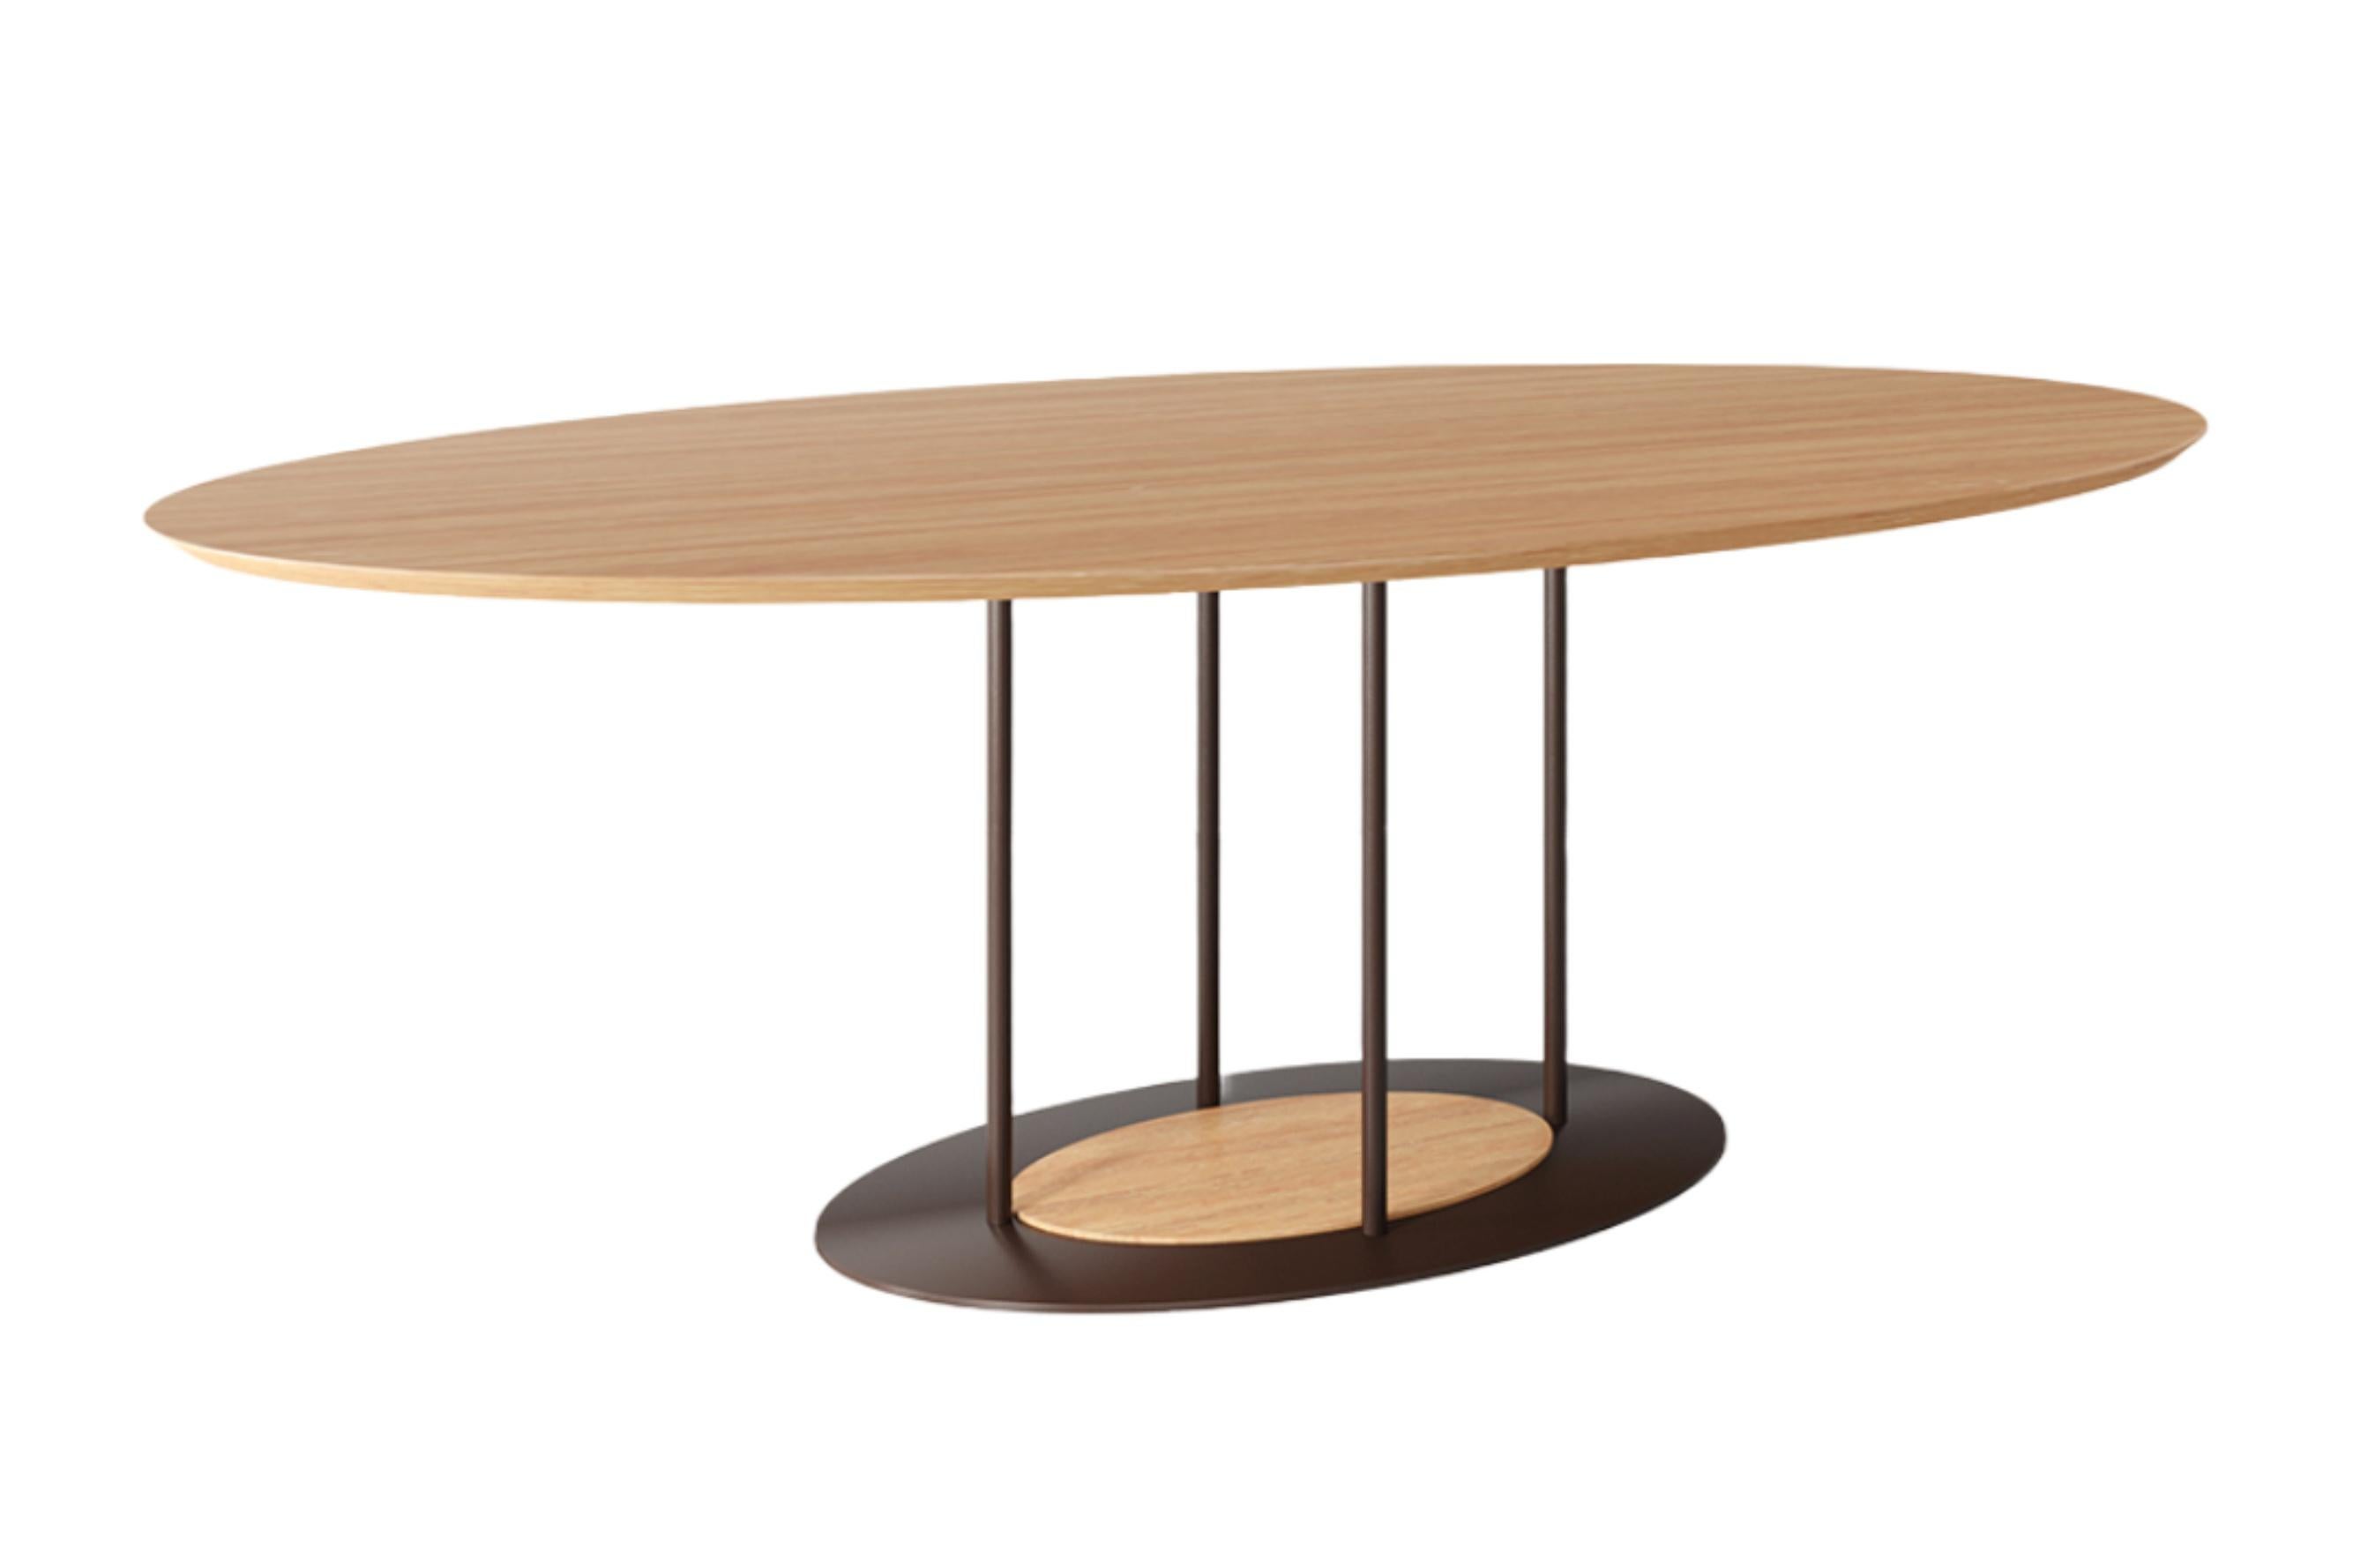 The designer Alessandra Delgado has a background in architecture and as so likes to use the challenges sometimes faced on architectural projects in her work. The dining table Pilar was designed having in mind the need that every architect has to